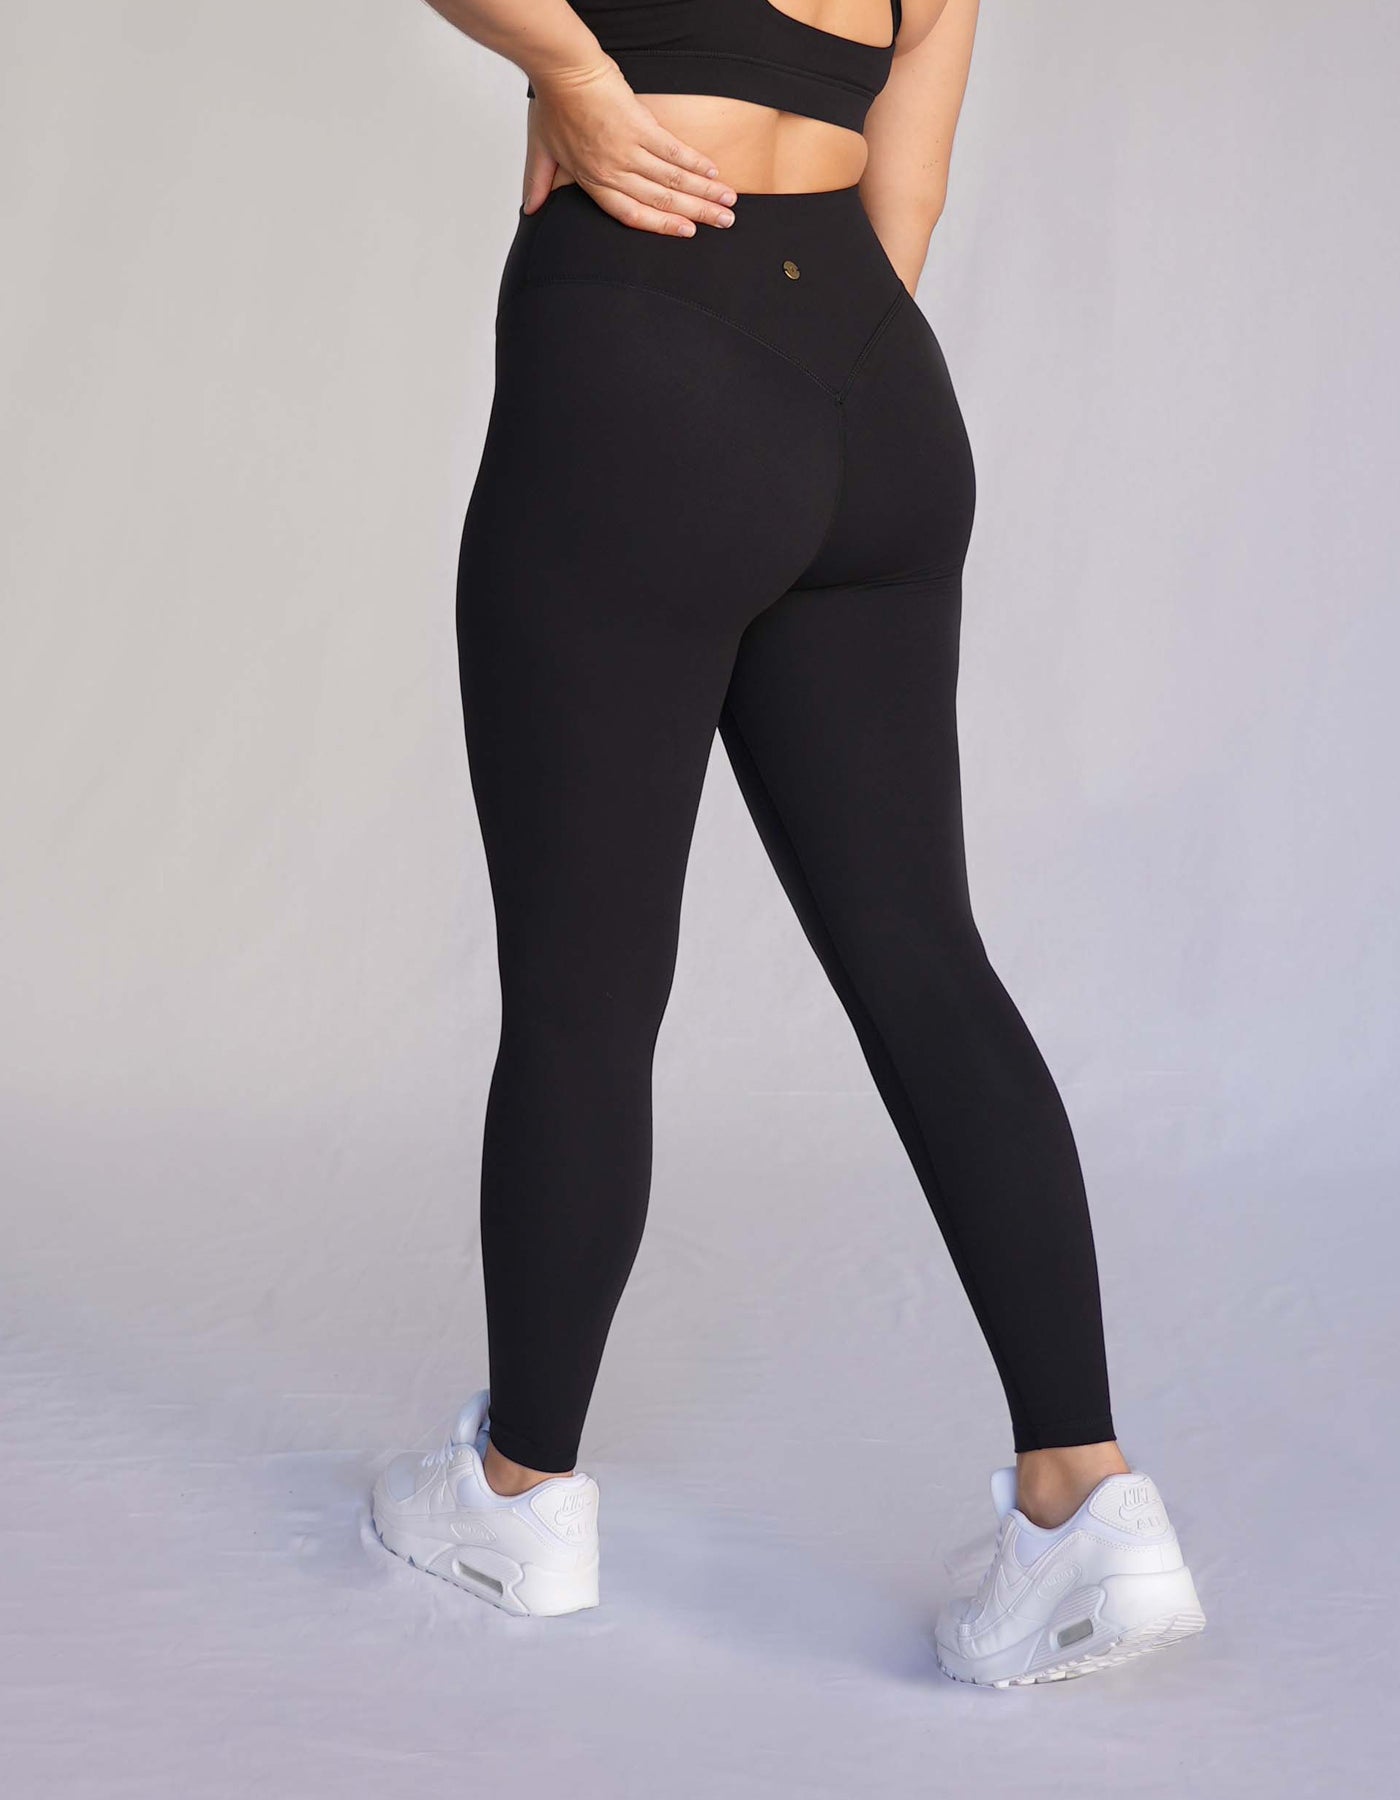 High Waisted Yoga Leggings for Women Workout Leggings with Inner Pocket,  Soft Basic Leggings for Everyday Home Workout, Sports Apparel -   Canada